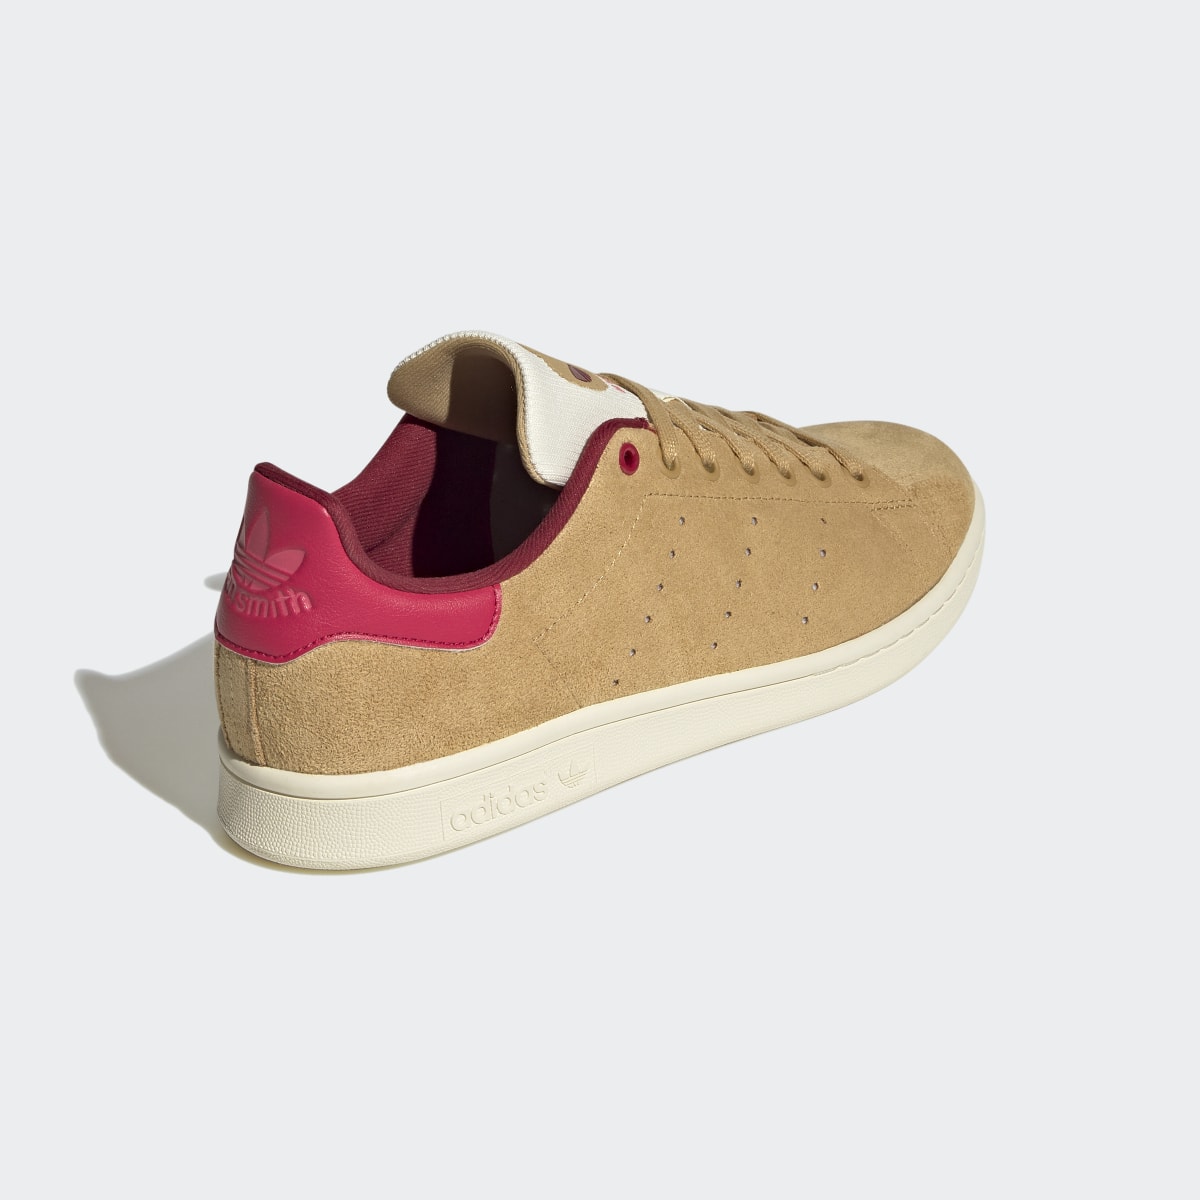 Adidas Stan Smith Shoes. 6